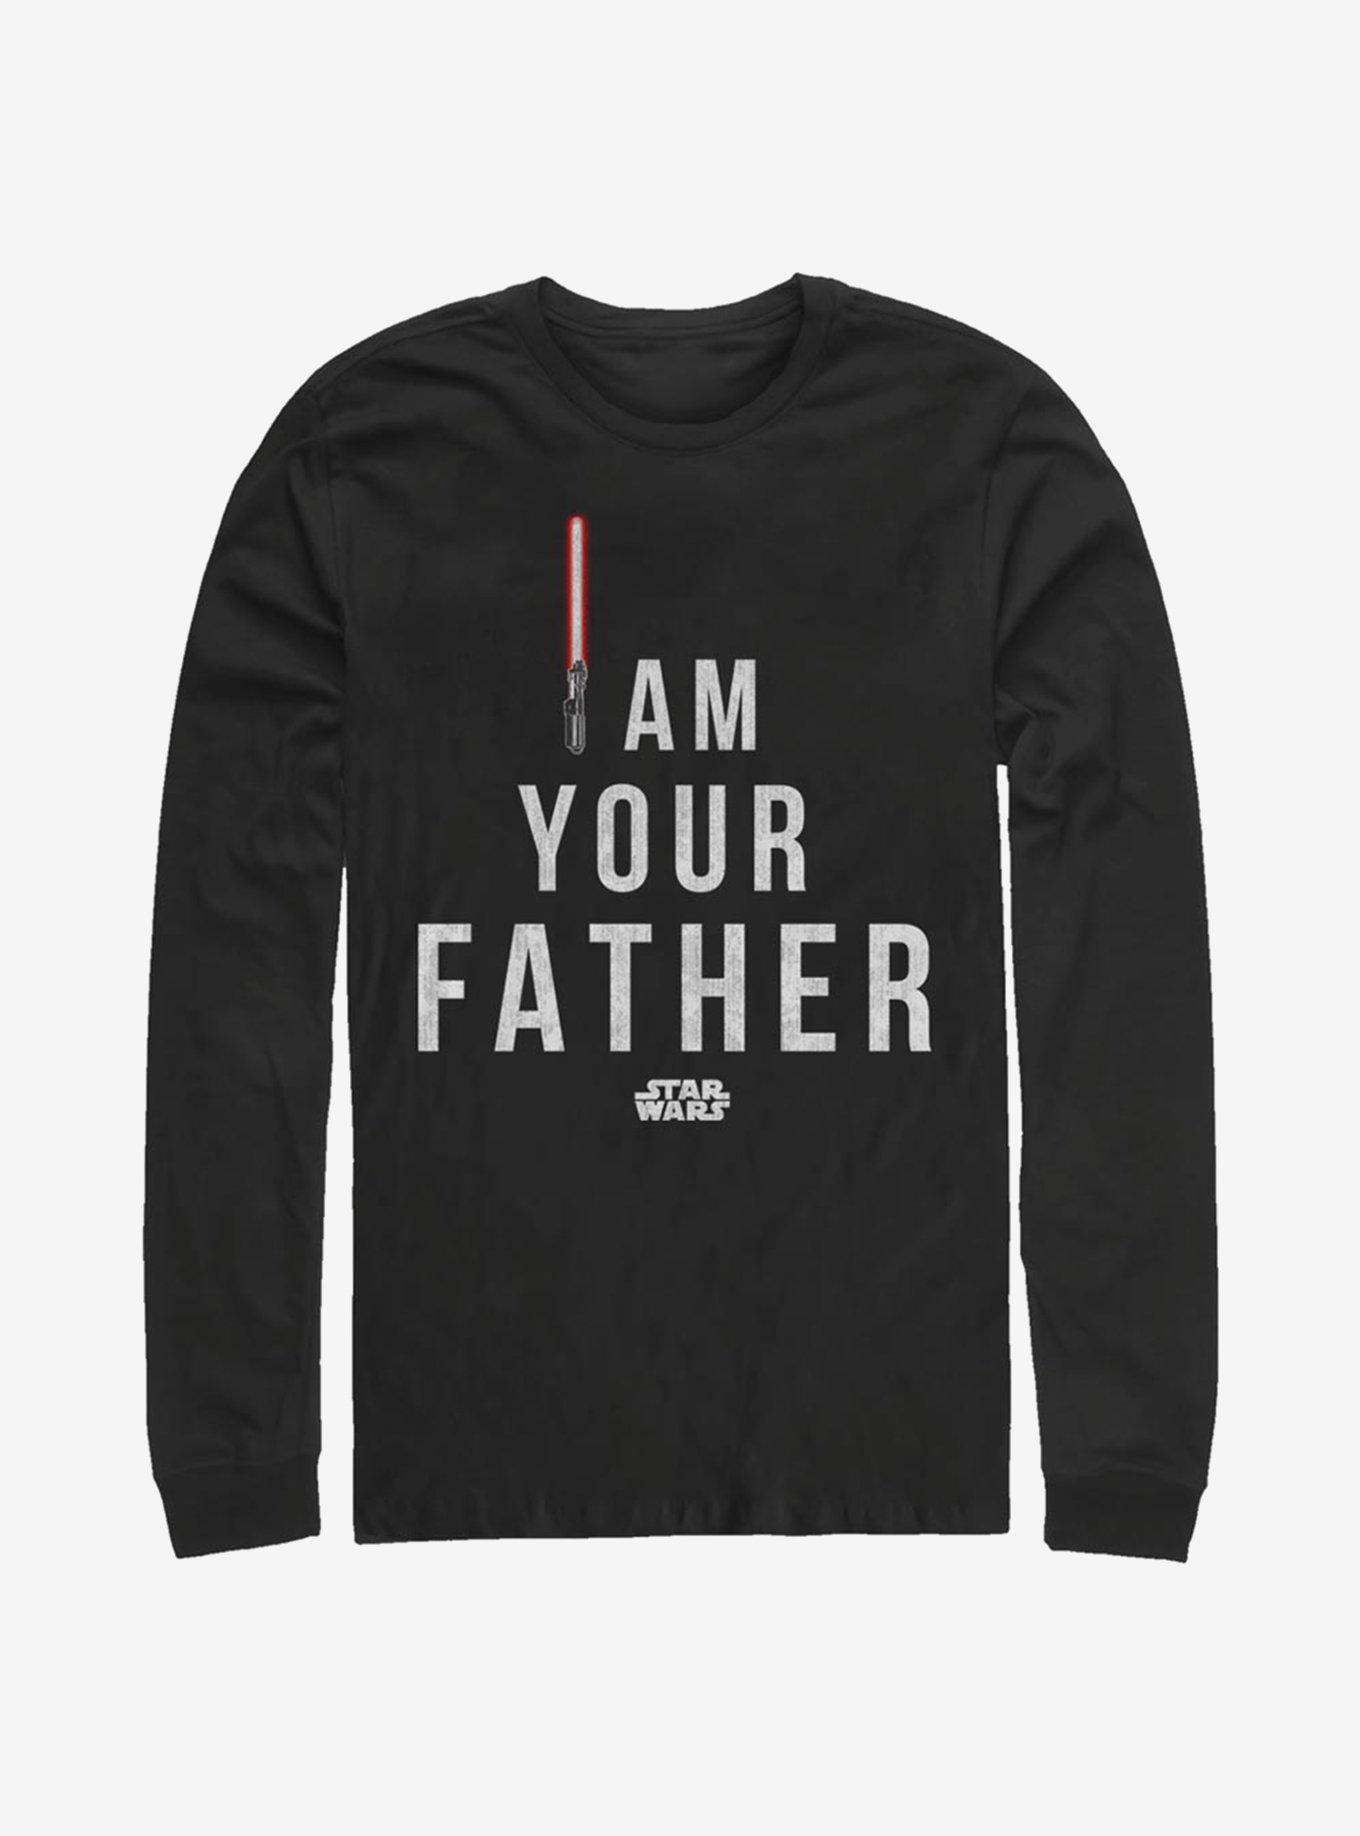 Star Wars Am Your Father Long-Sleeve T-Shirt, BLACK, hi-res